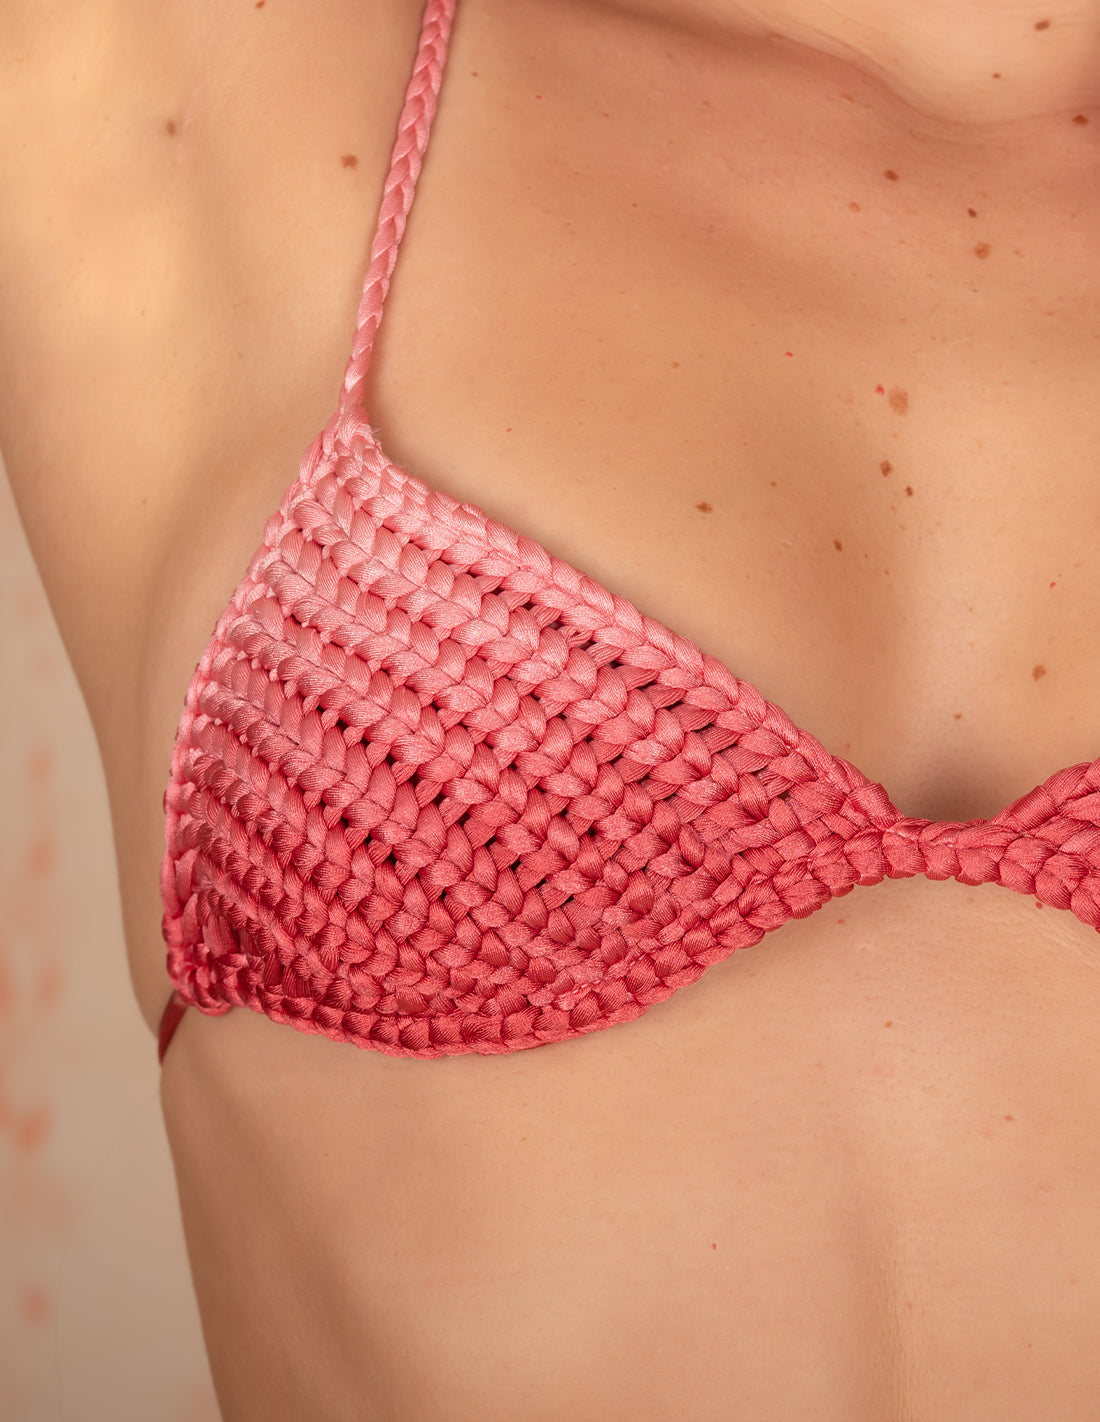 Chiflarte Top Faded Red Flower. Hand-Dyed Bikini Top With Hand Woven Macramé In Faded Red Flower. Entreaguas